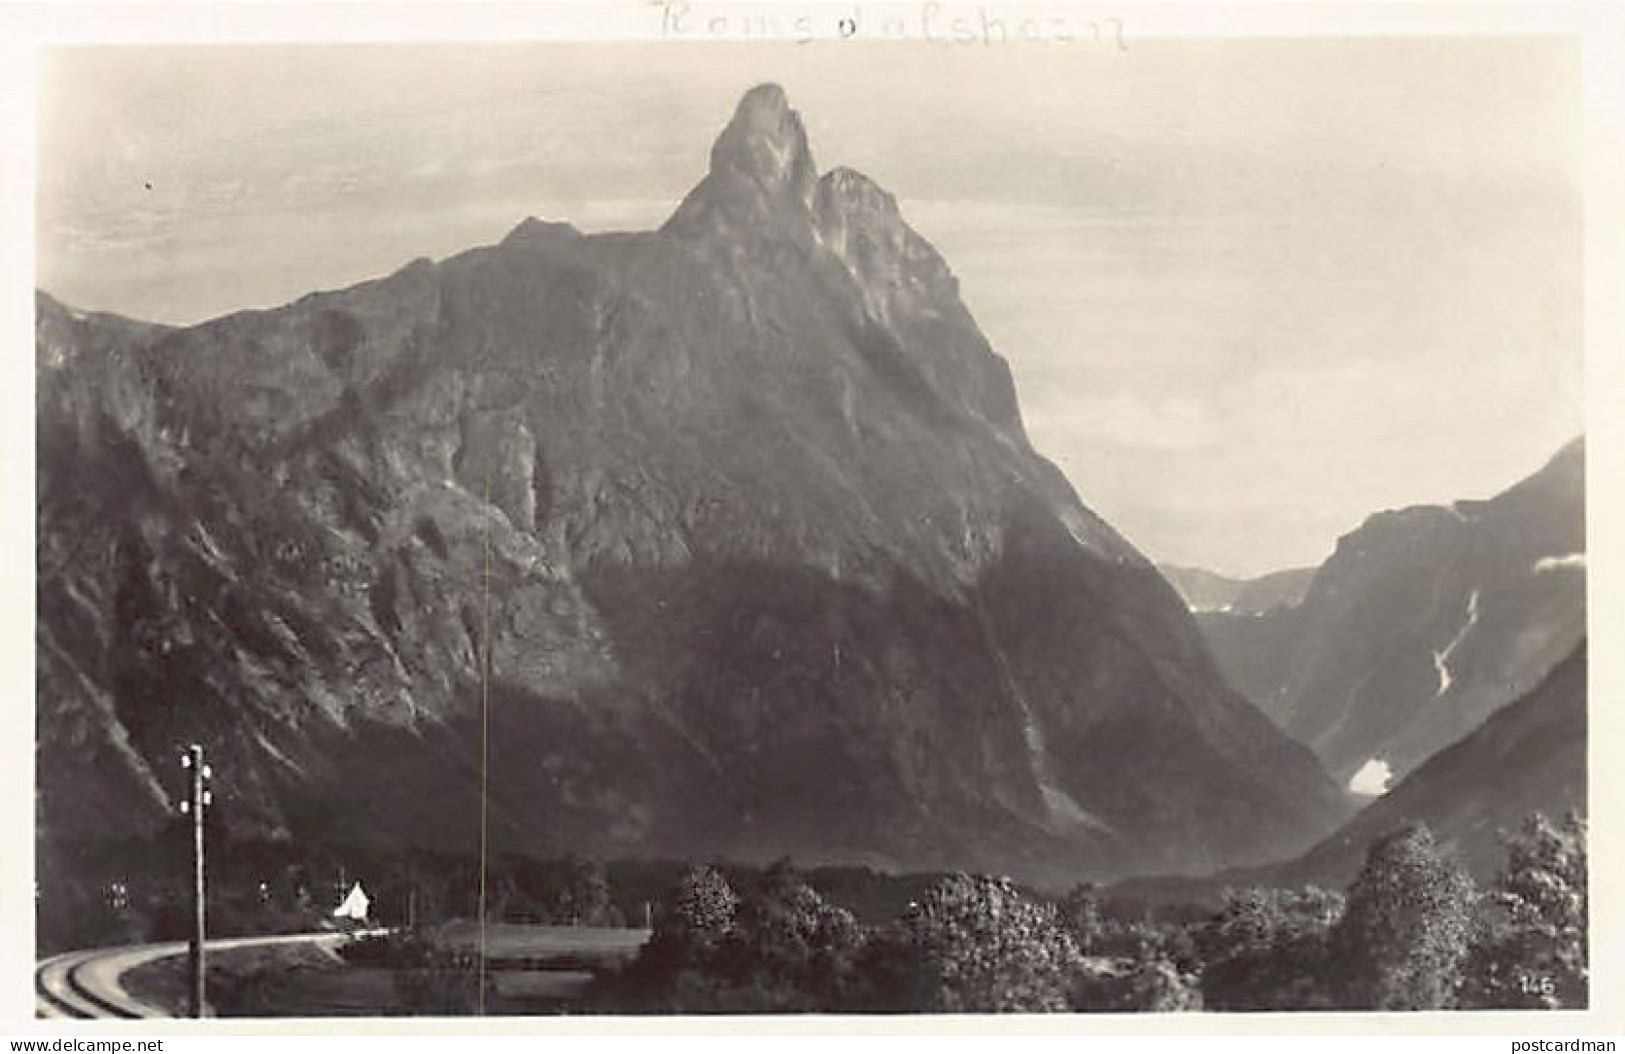 Norway - Andalsnes - View Of Romsdalshorn From The Rauma Railway - Publ. Carl Müller & Sohn - Norwegen